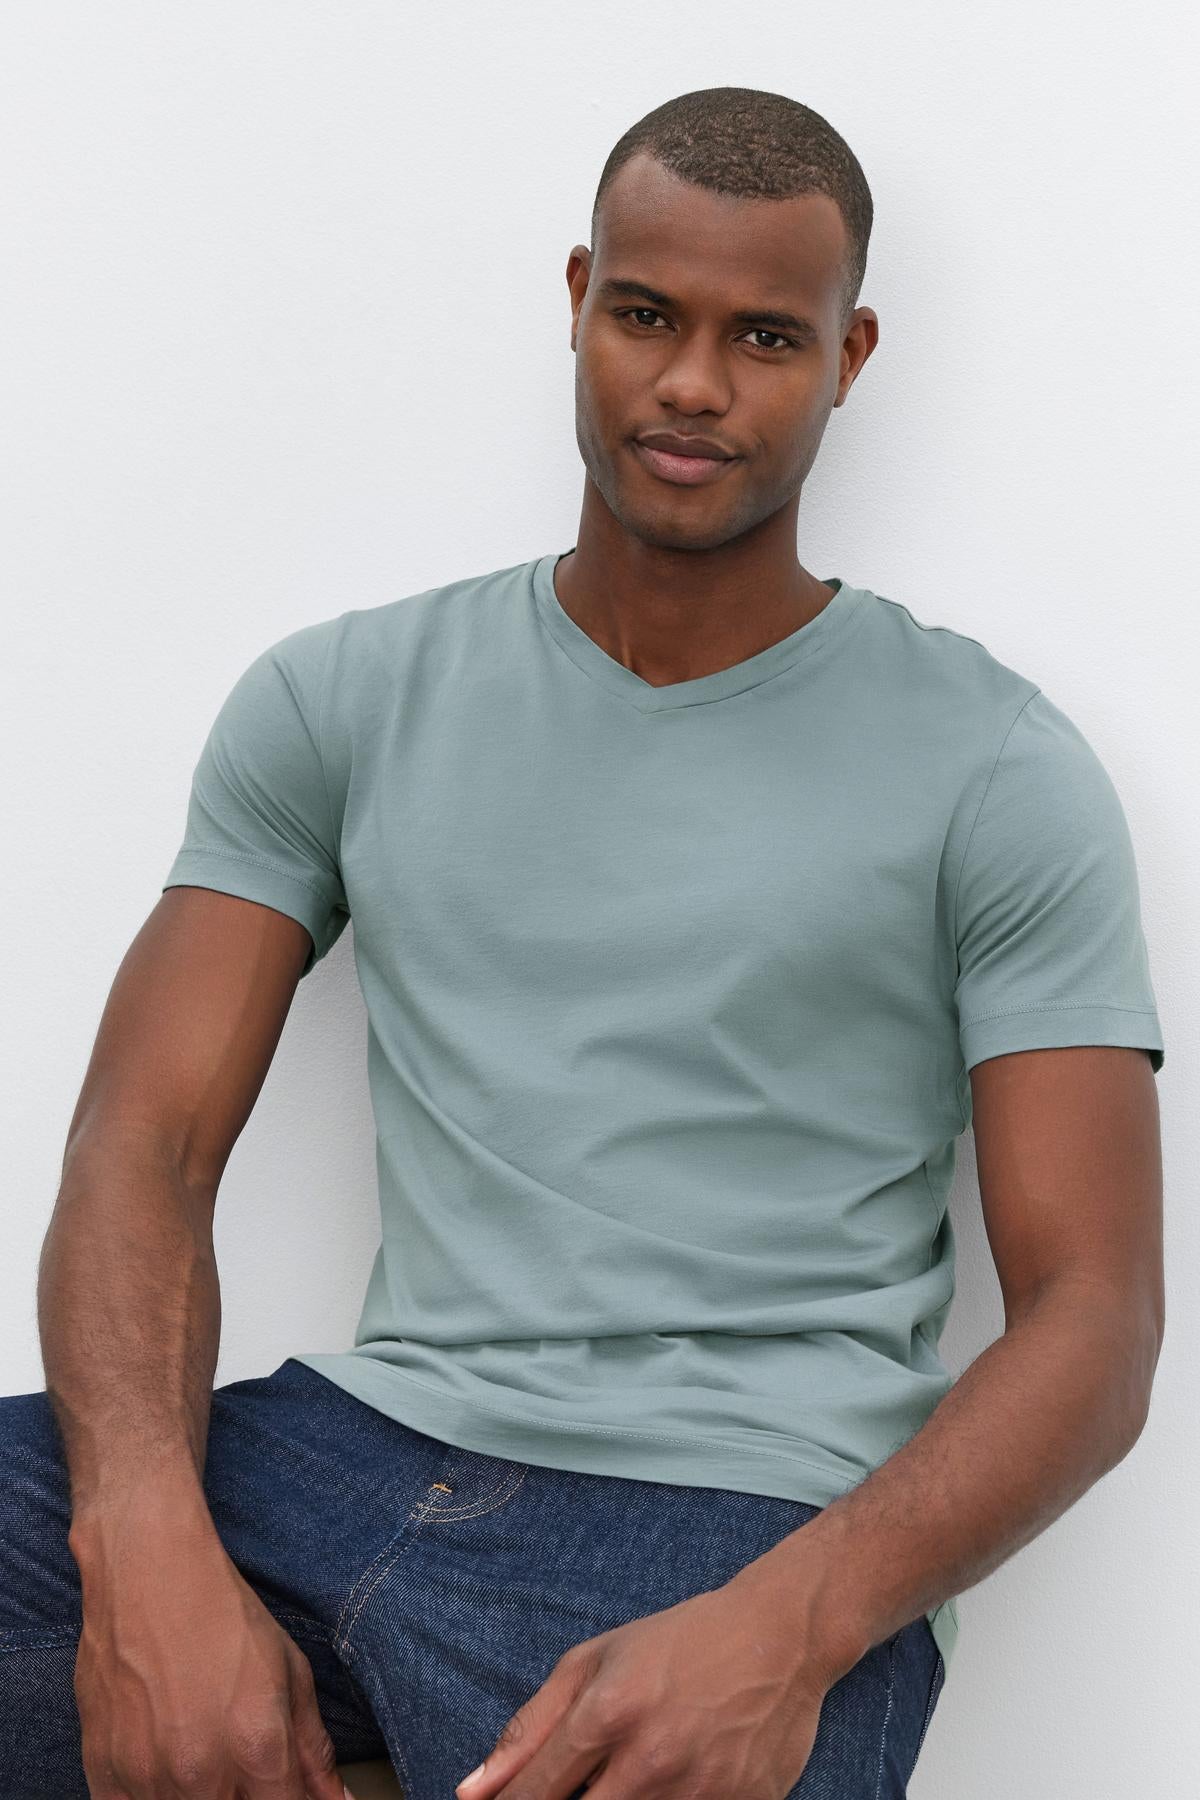   A man wearing a light green SAMSEN TEE by Velvet by Graham & Spencer with a v-neckline and dark blue jeans poses sitting against a plain white background, perfect for everyday wear. 